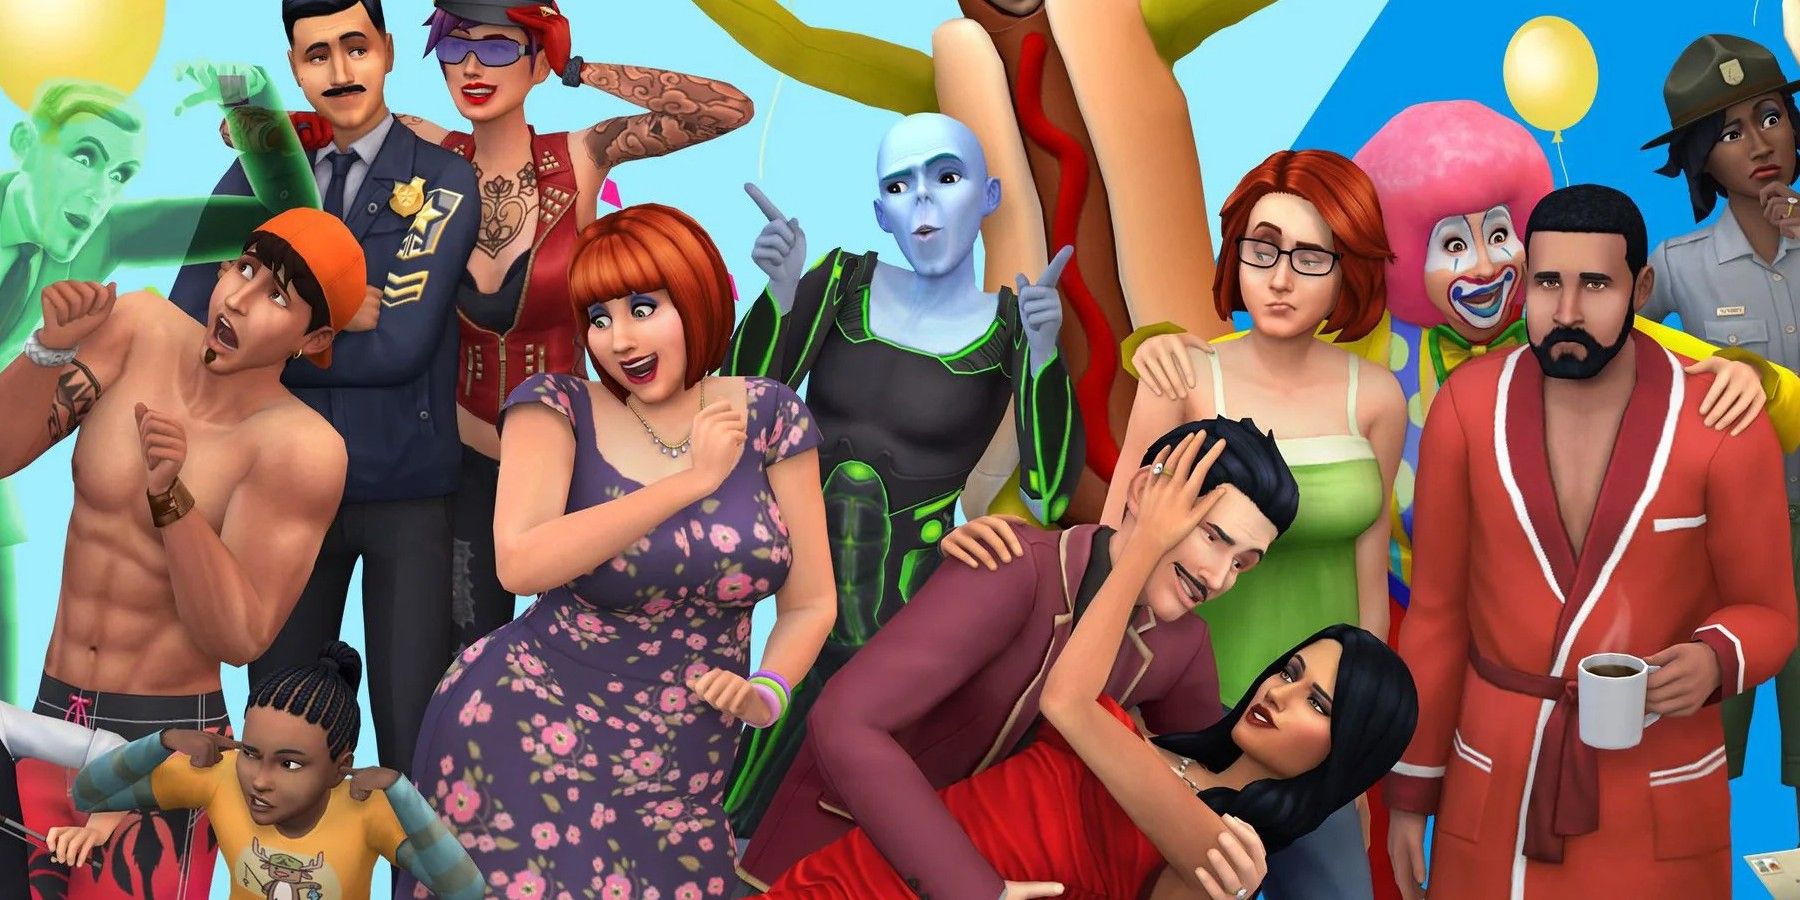 sims 4 key art featuring various official characters